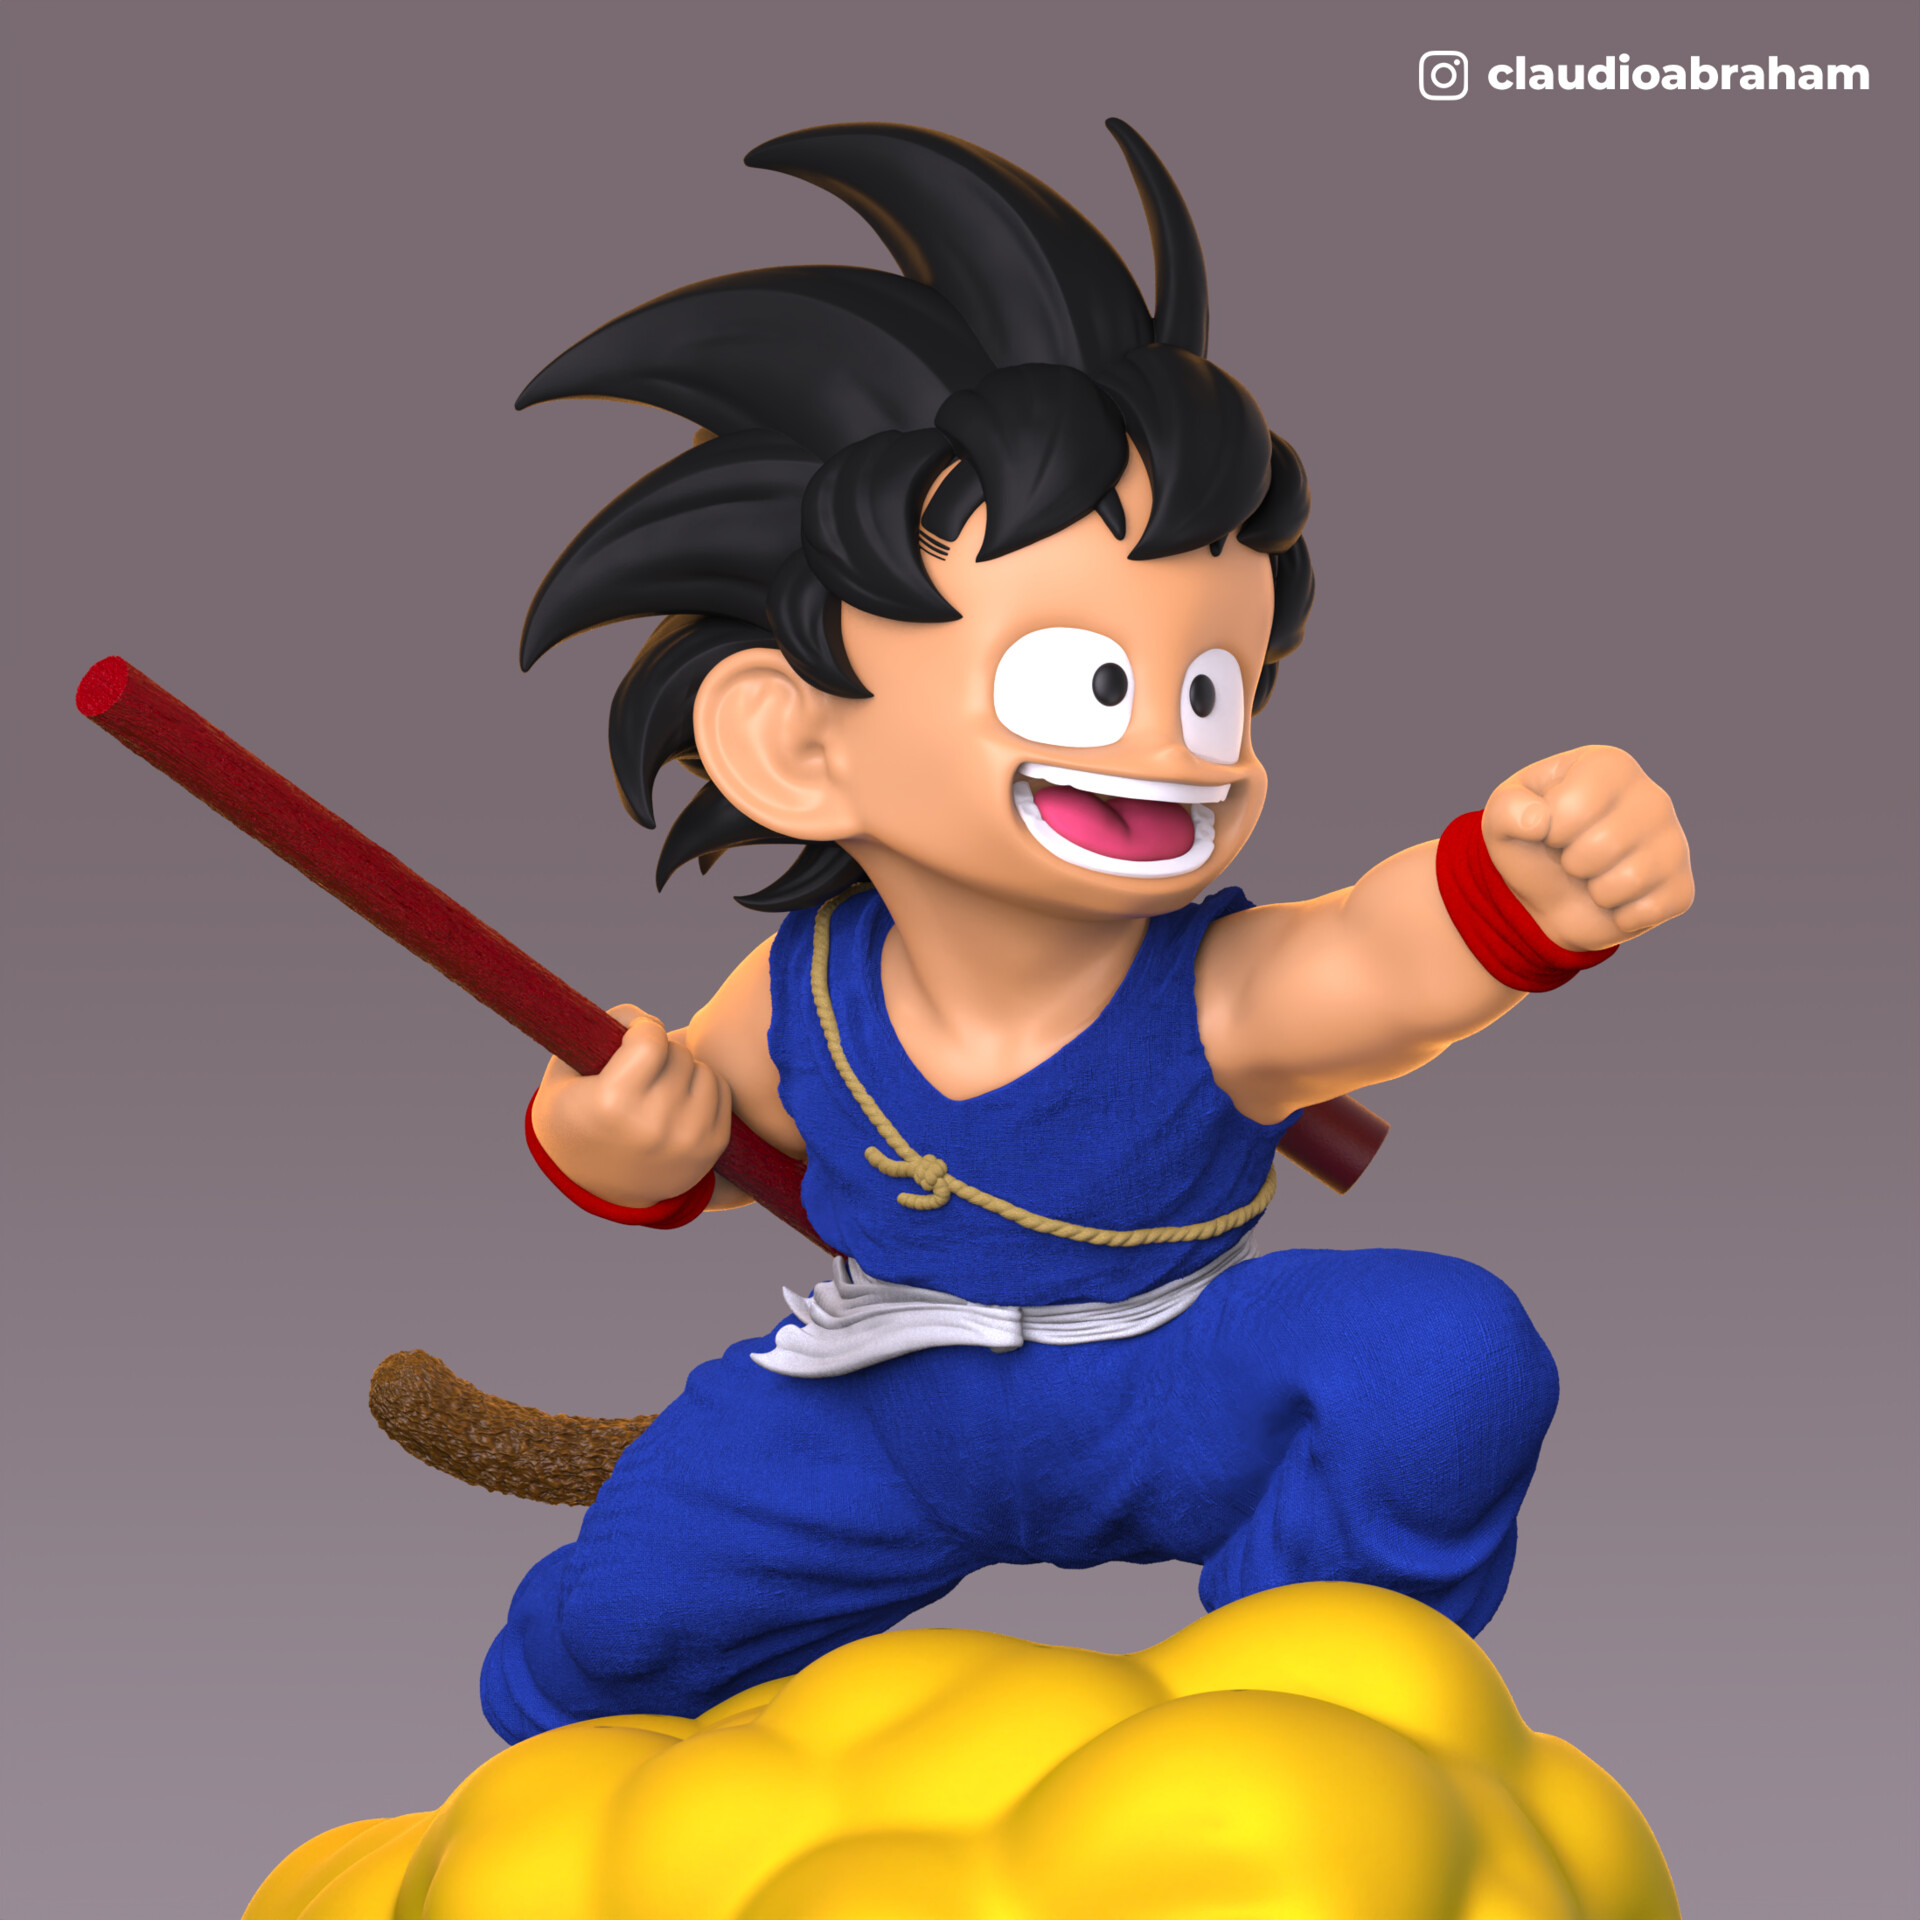 Kid Goku with Flying Nimbus - Blue Suit by Claudio Abraham